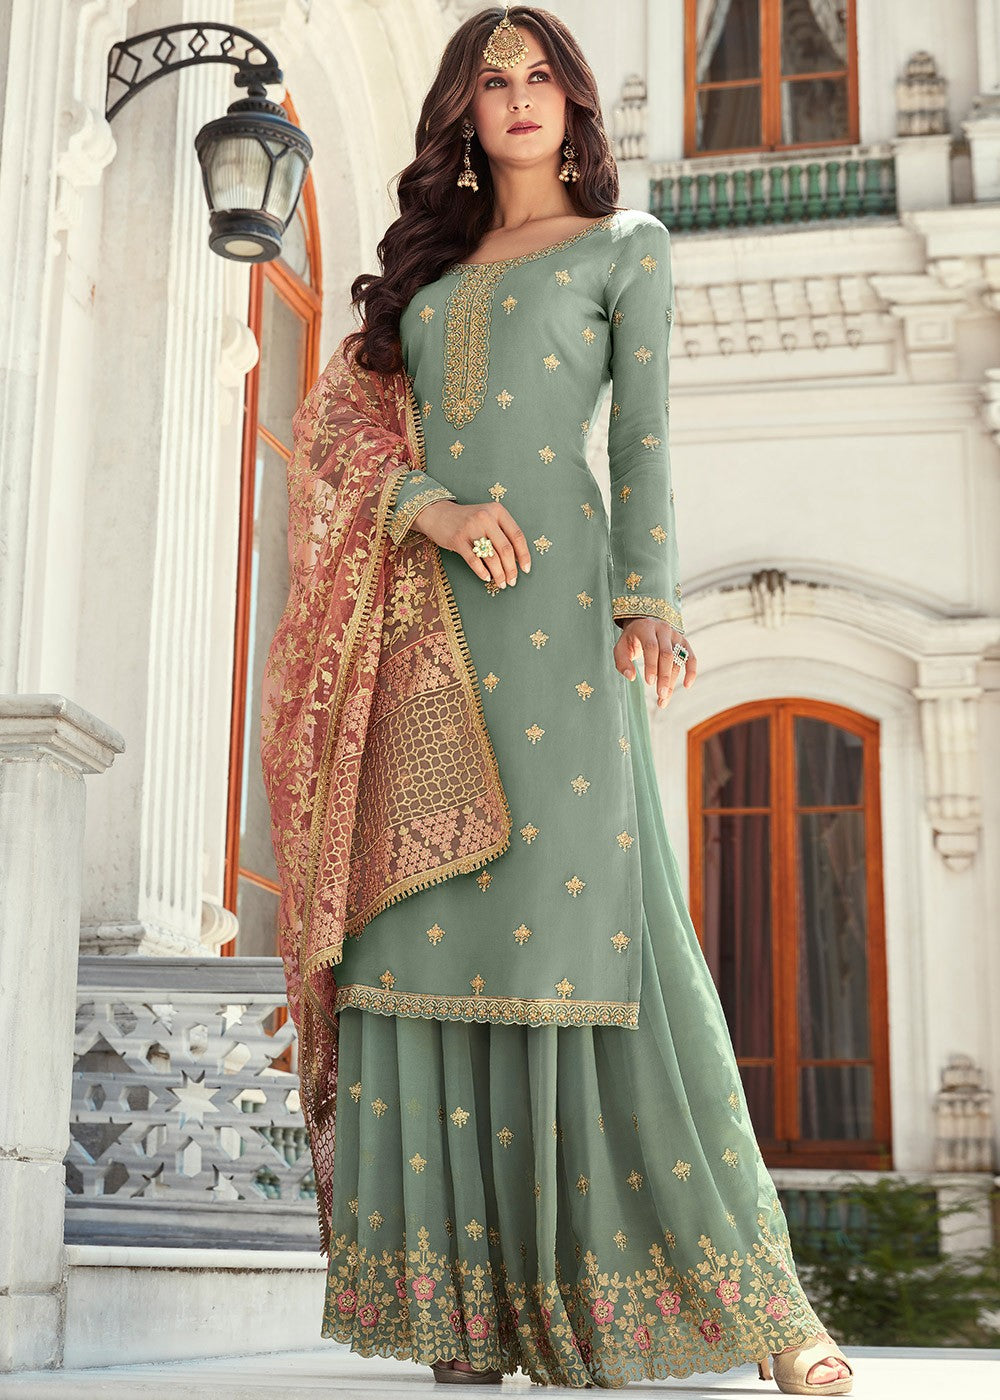 Buy Teal Embroidered Gharara Suit In USA, UK, Canada, Australia ...